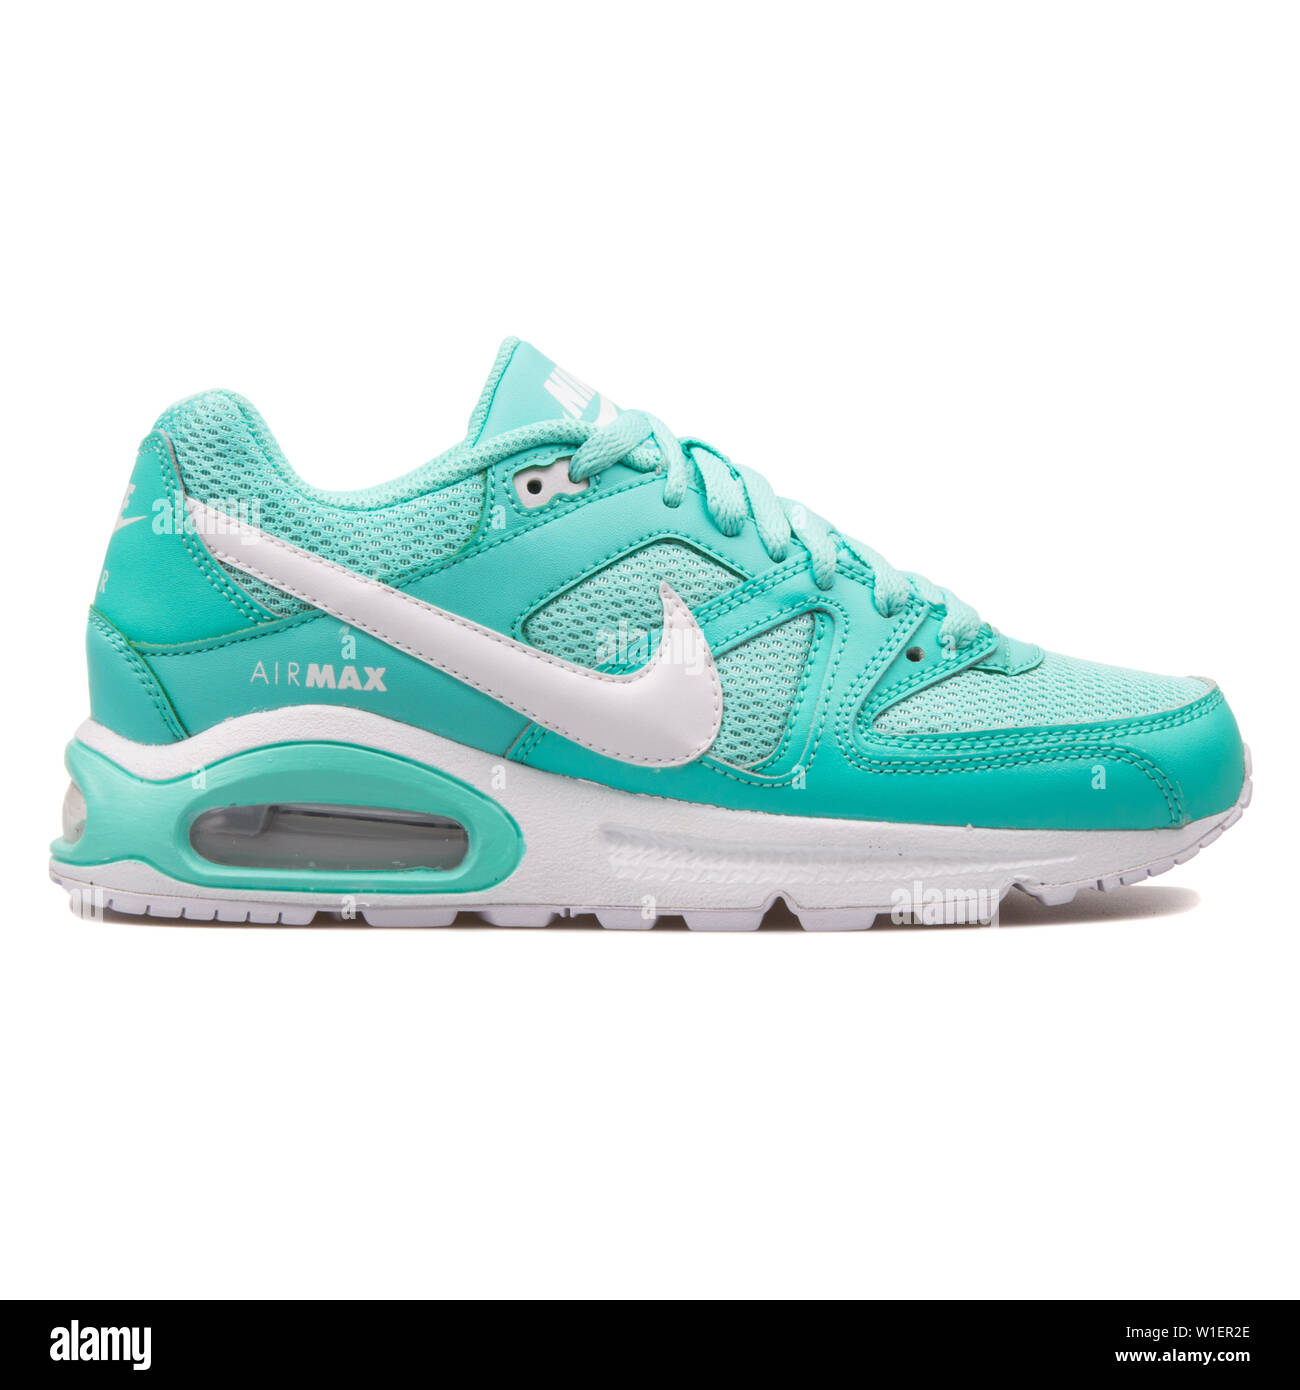 VIENNA, AUSTRIA - AUGUST 10, 2017: Nike Air Max Command turquoise and white  sneaker on white background Stock Photo - Alamy